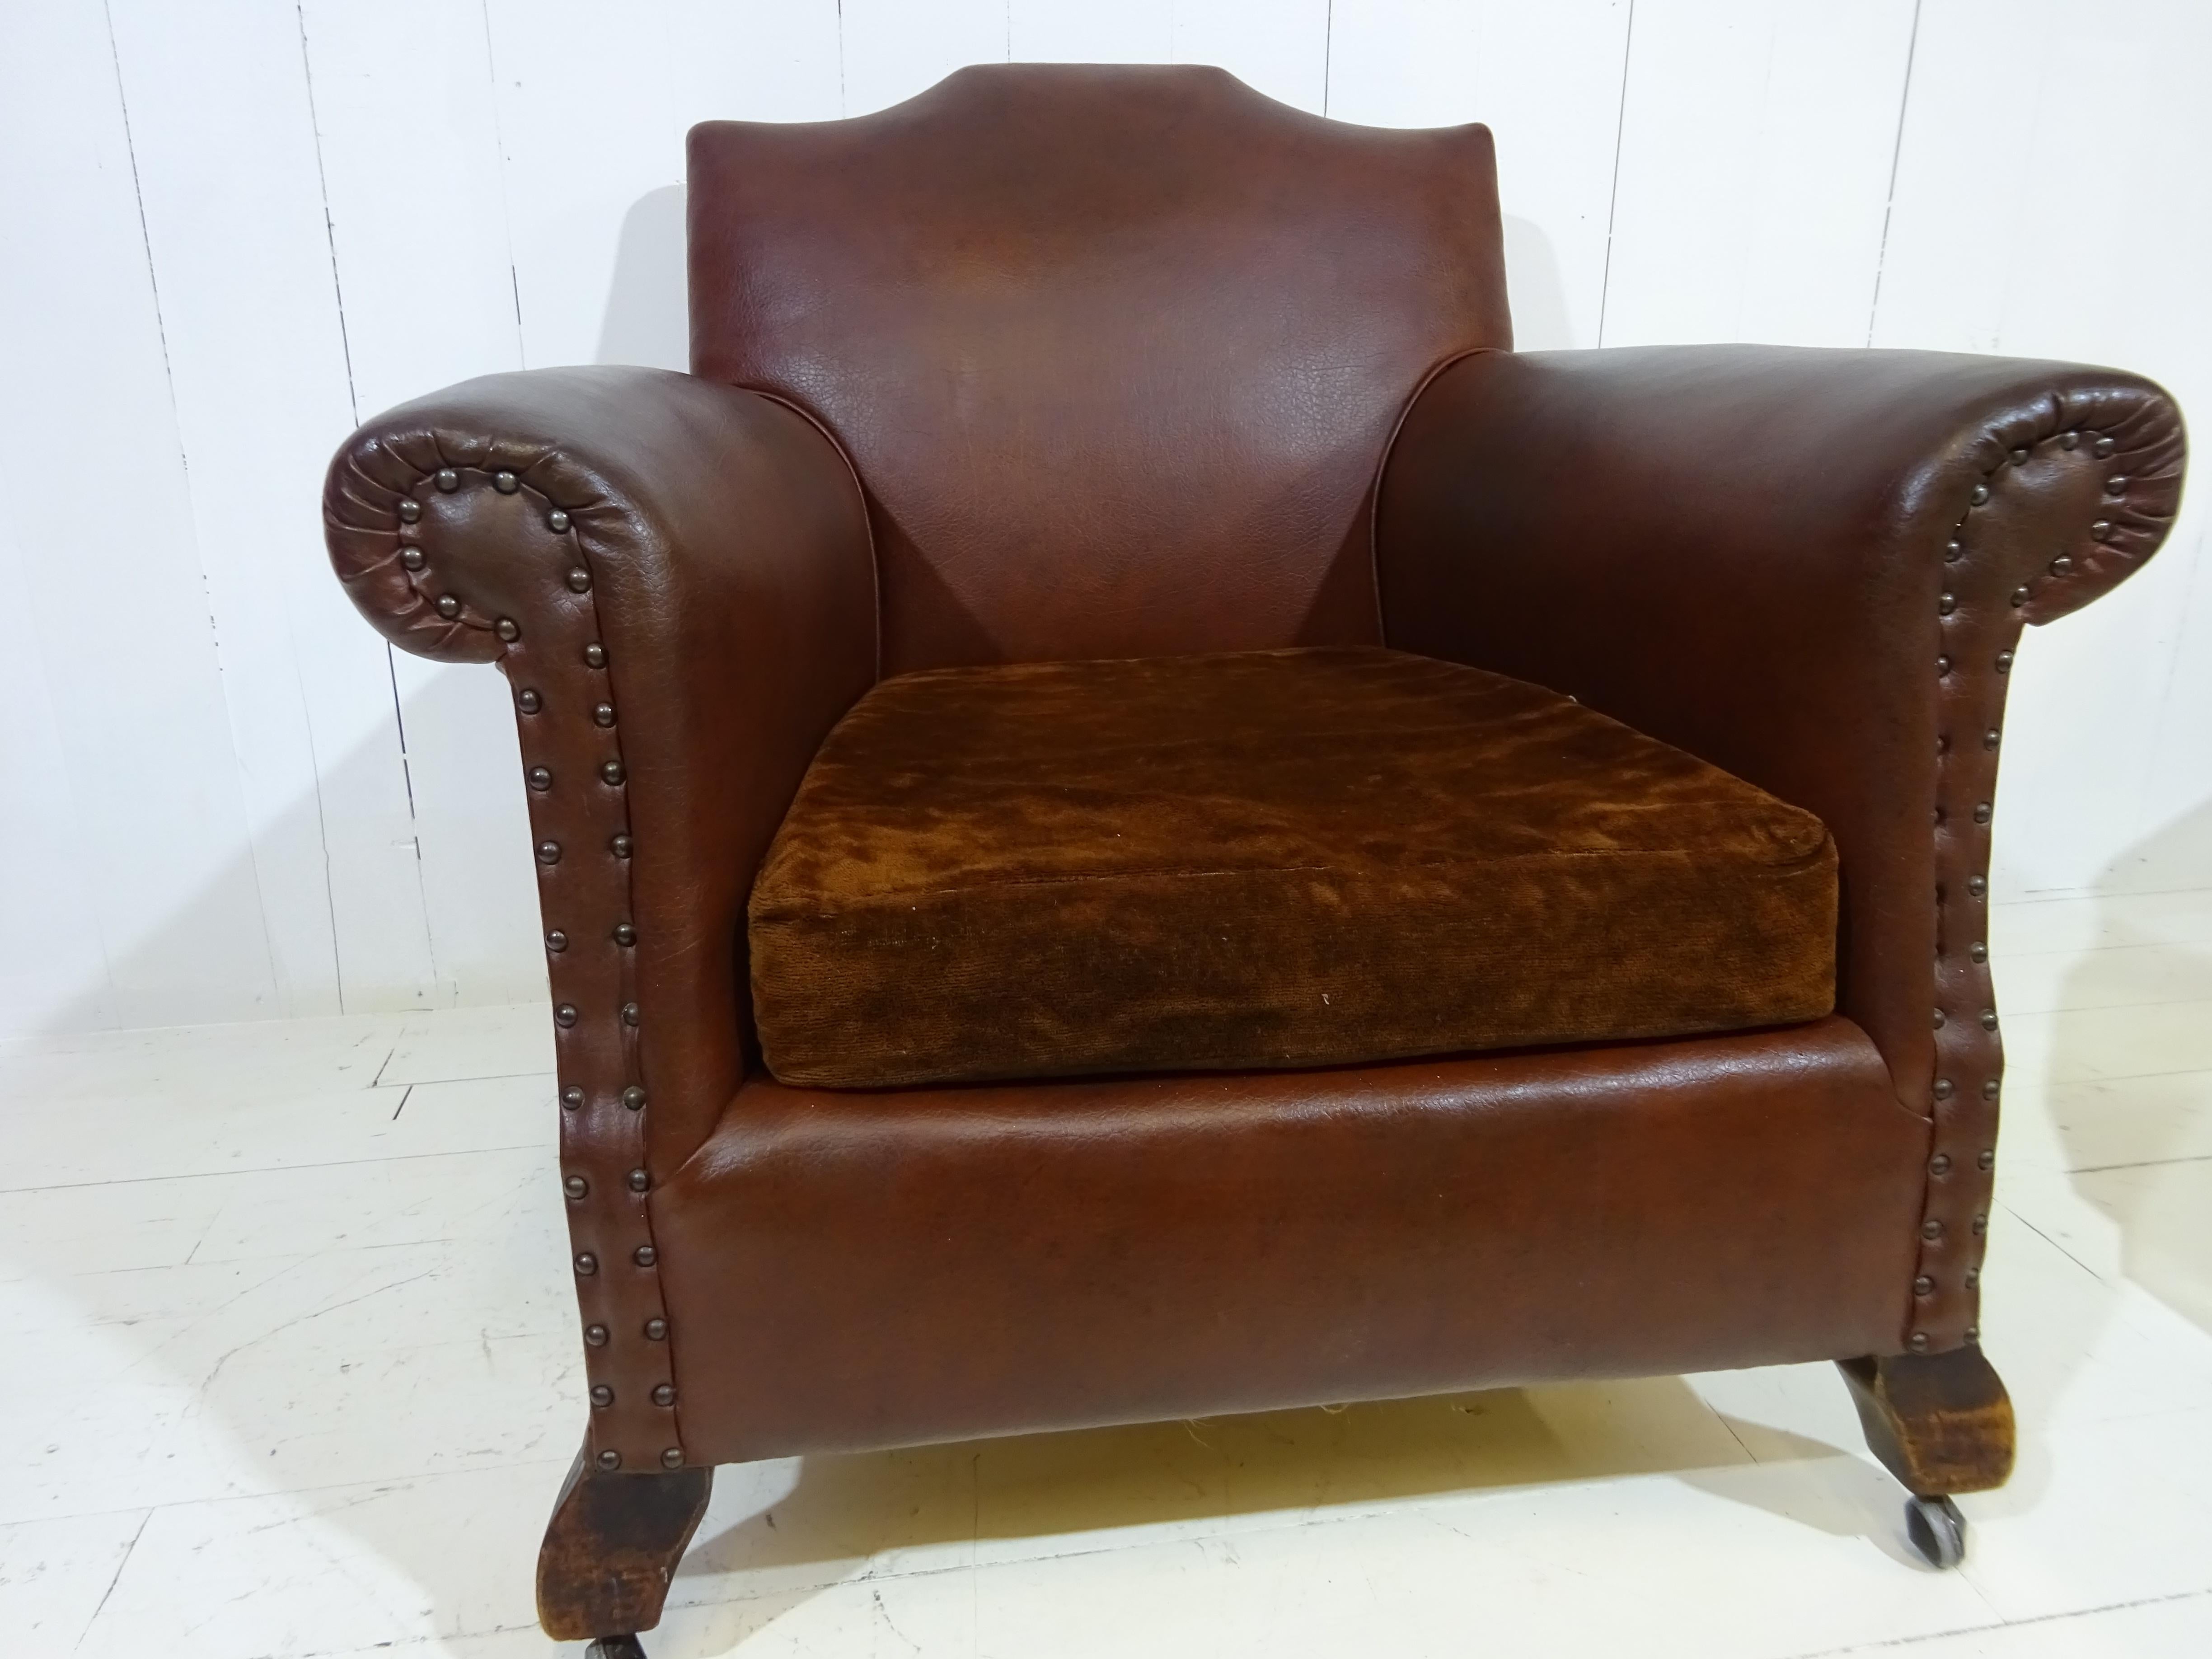 Beech Original 1920's Art Deco Club Chair in Brown Faux Leather